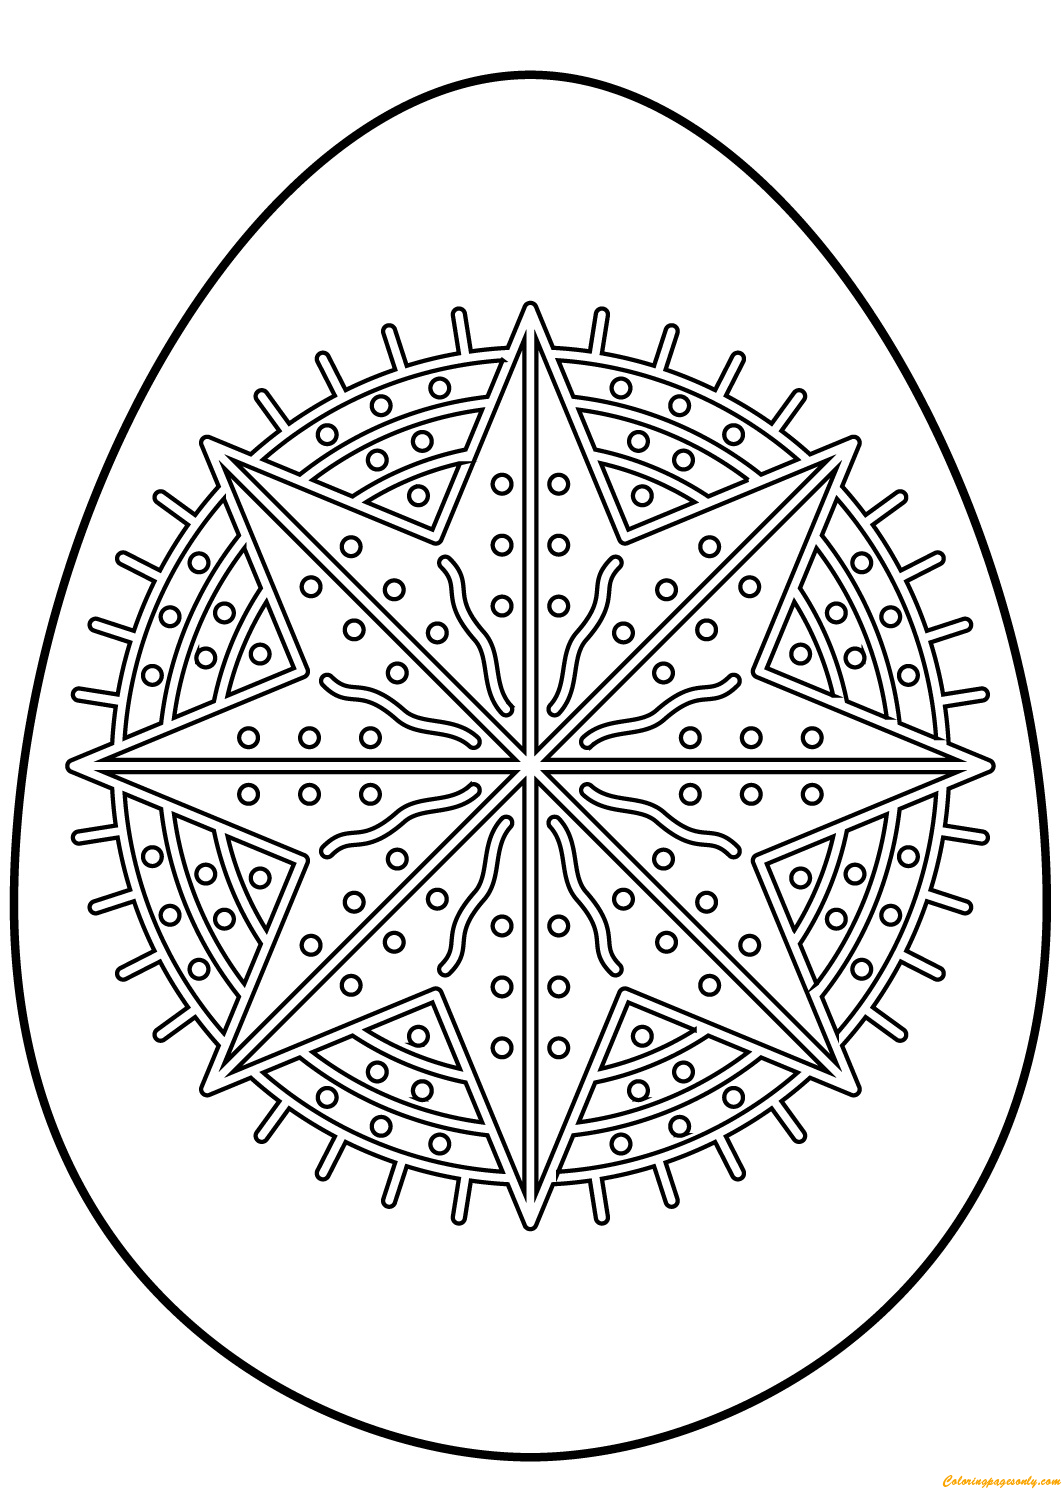 Download Easter Egg with Octagram Star Pattern Coloring Pages - Arts & Culture Coloring Pages - Free ...